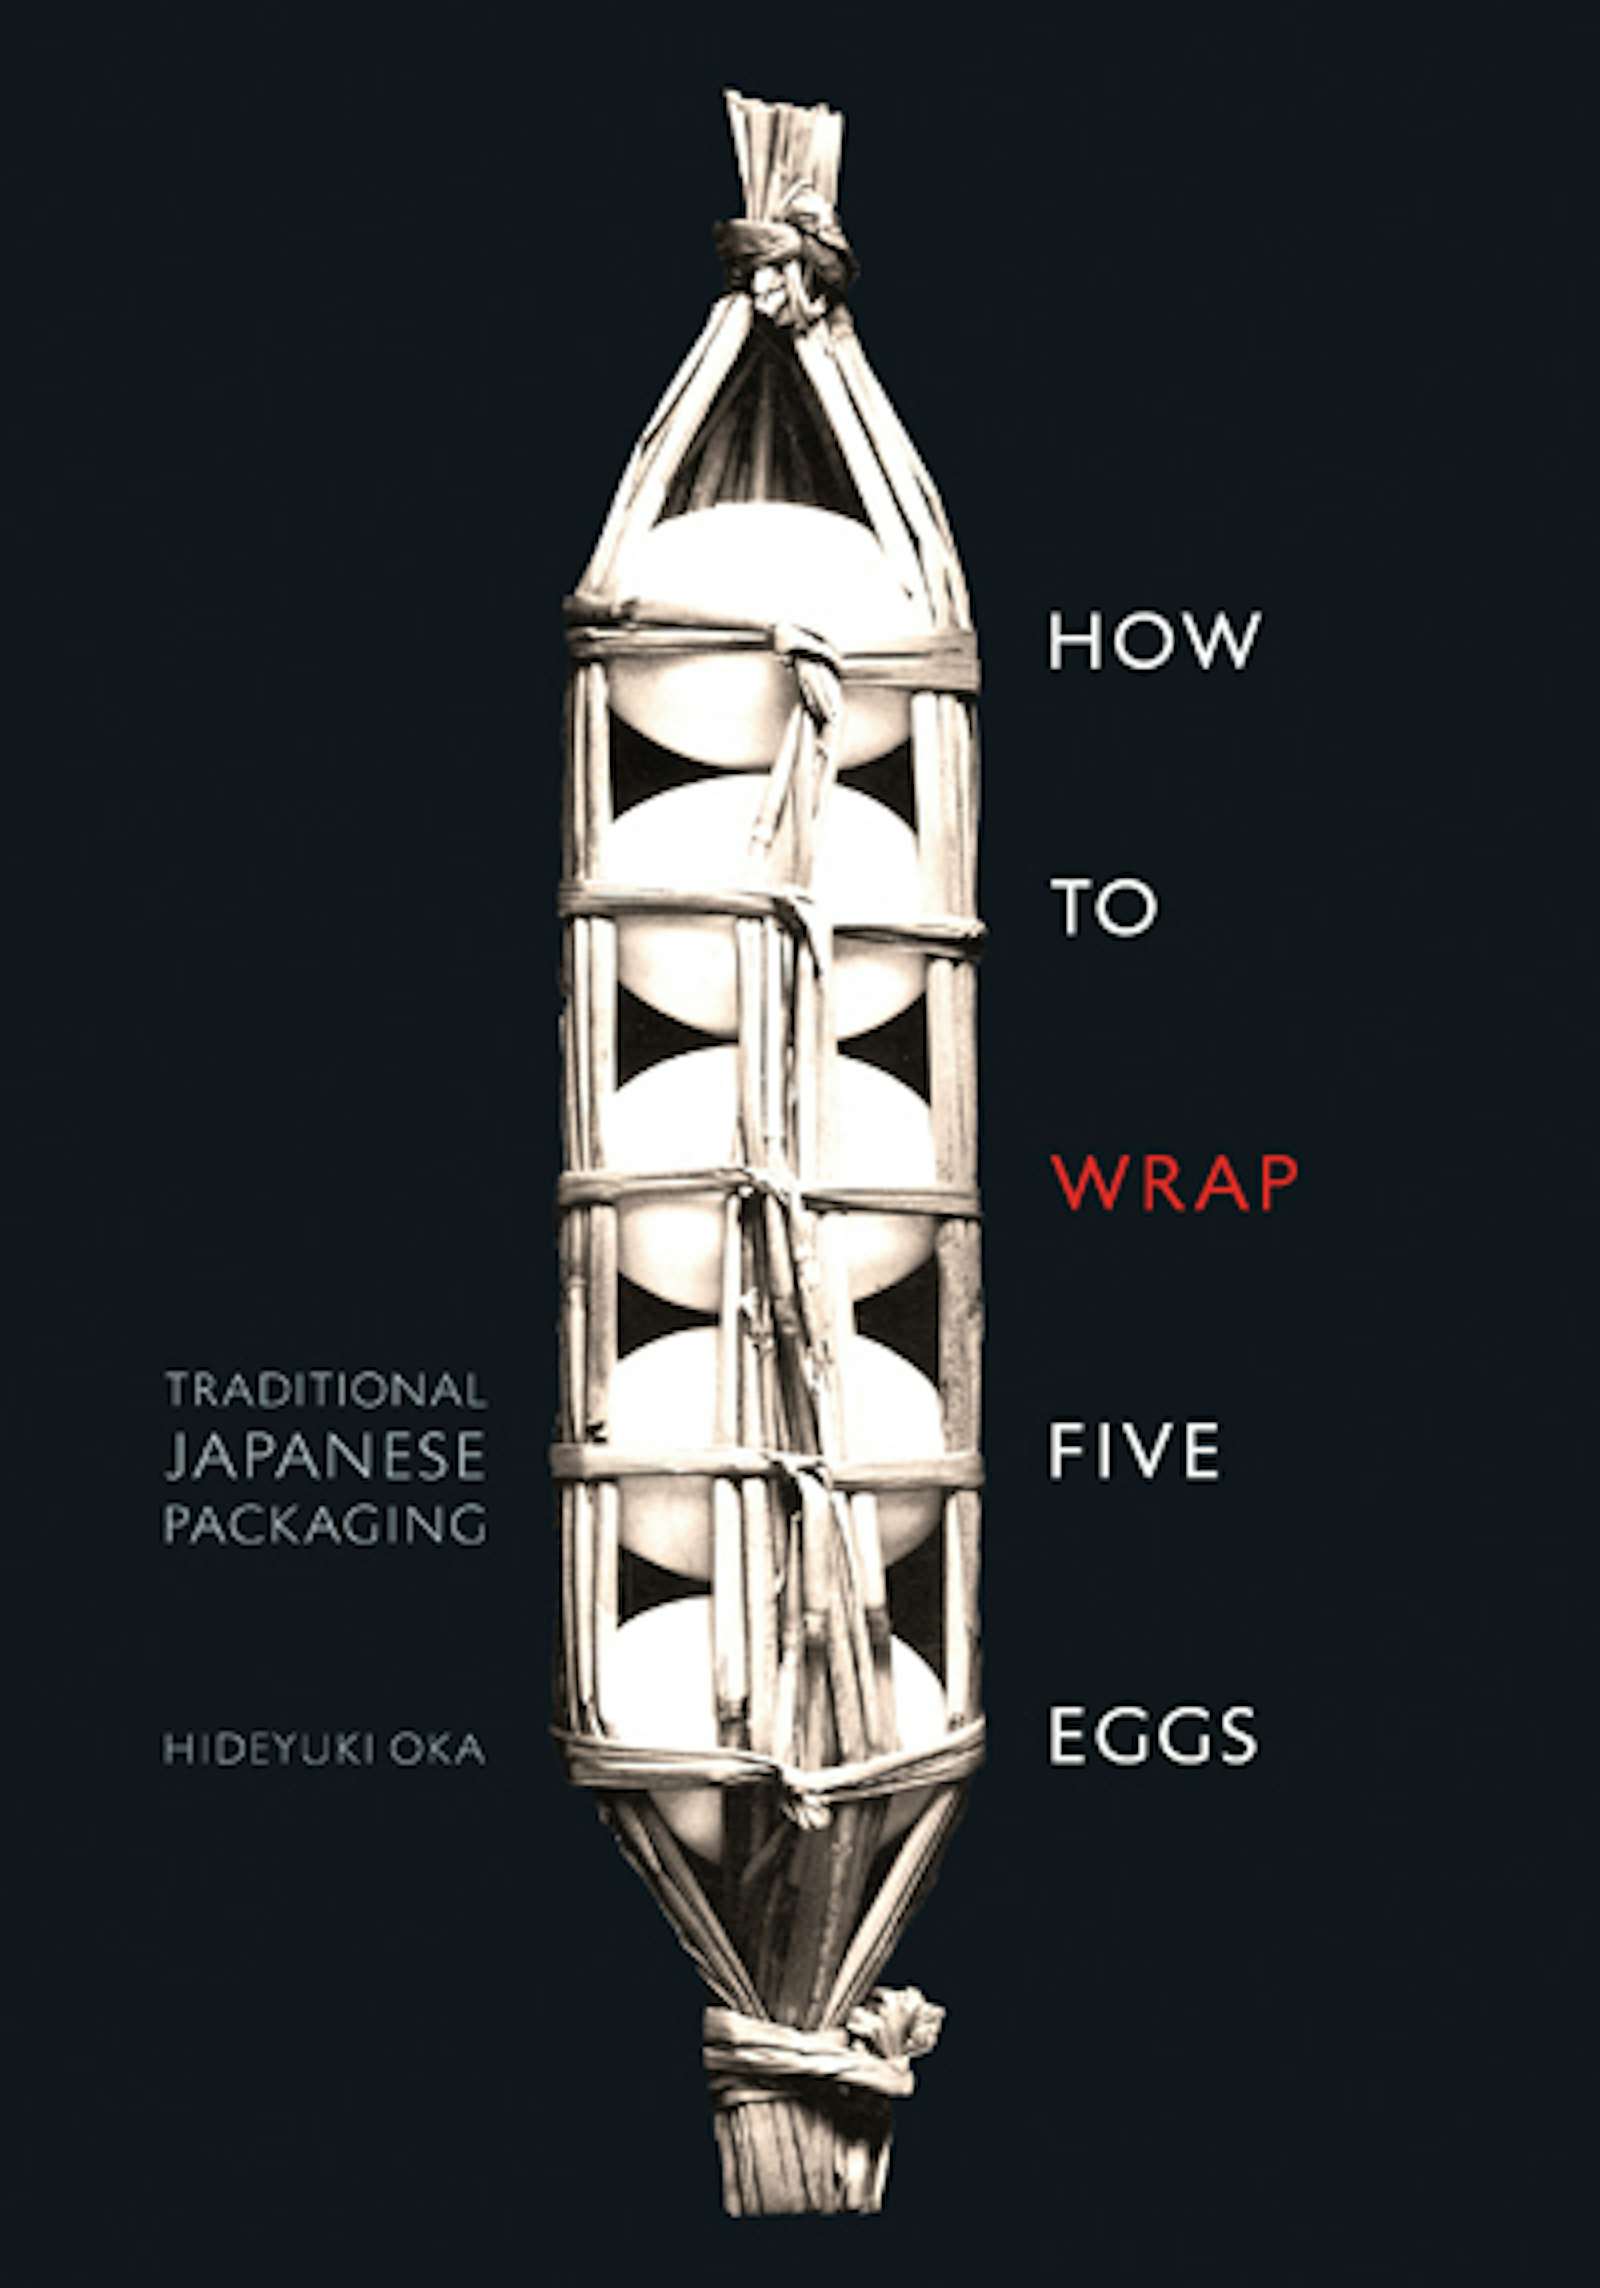 how-to-wrap-five-eggs-reissued-dwell